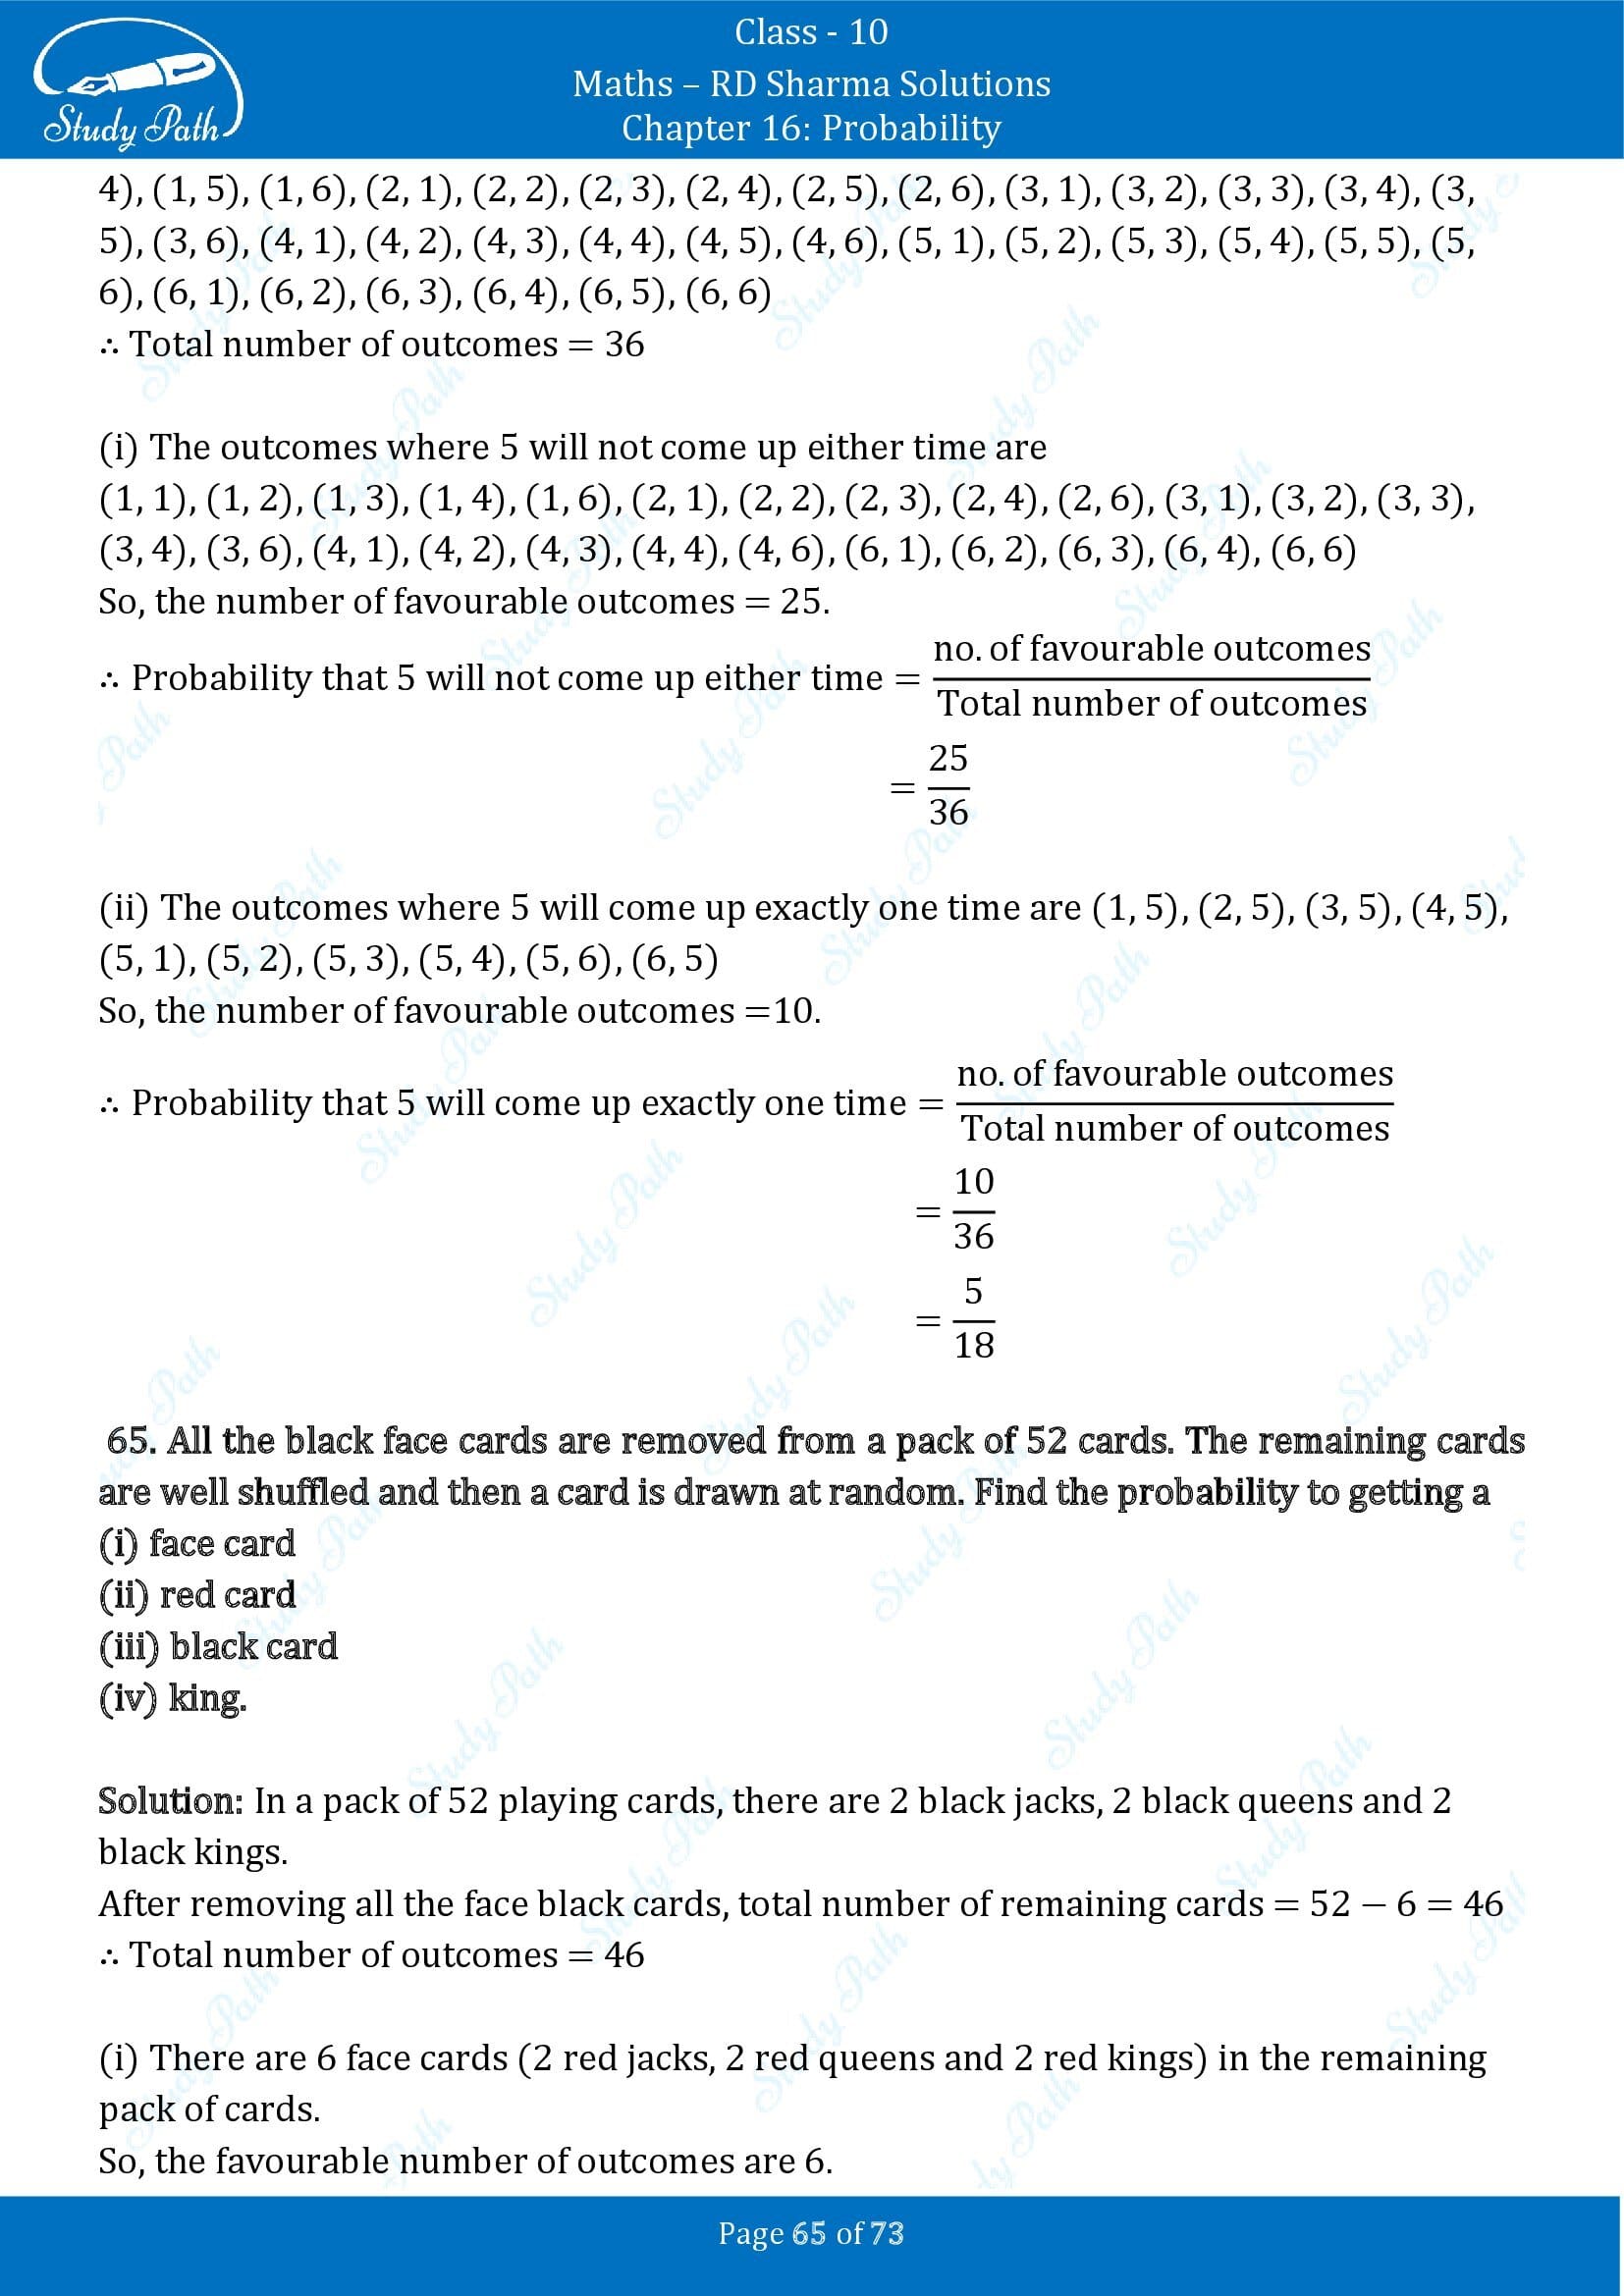 RD Sharma Solutions Class 10 Chapter 16 Probability Exercise 16.1 00065